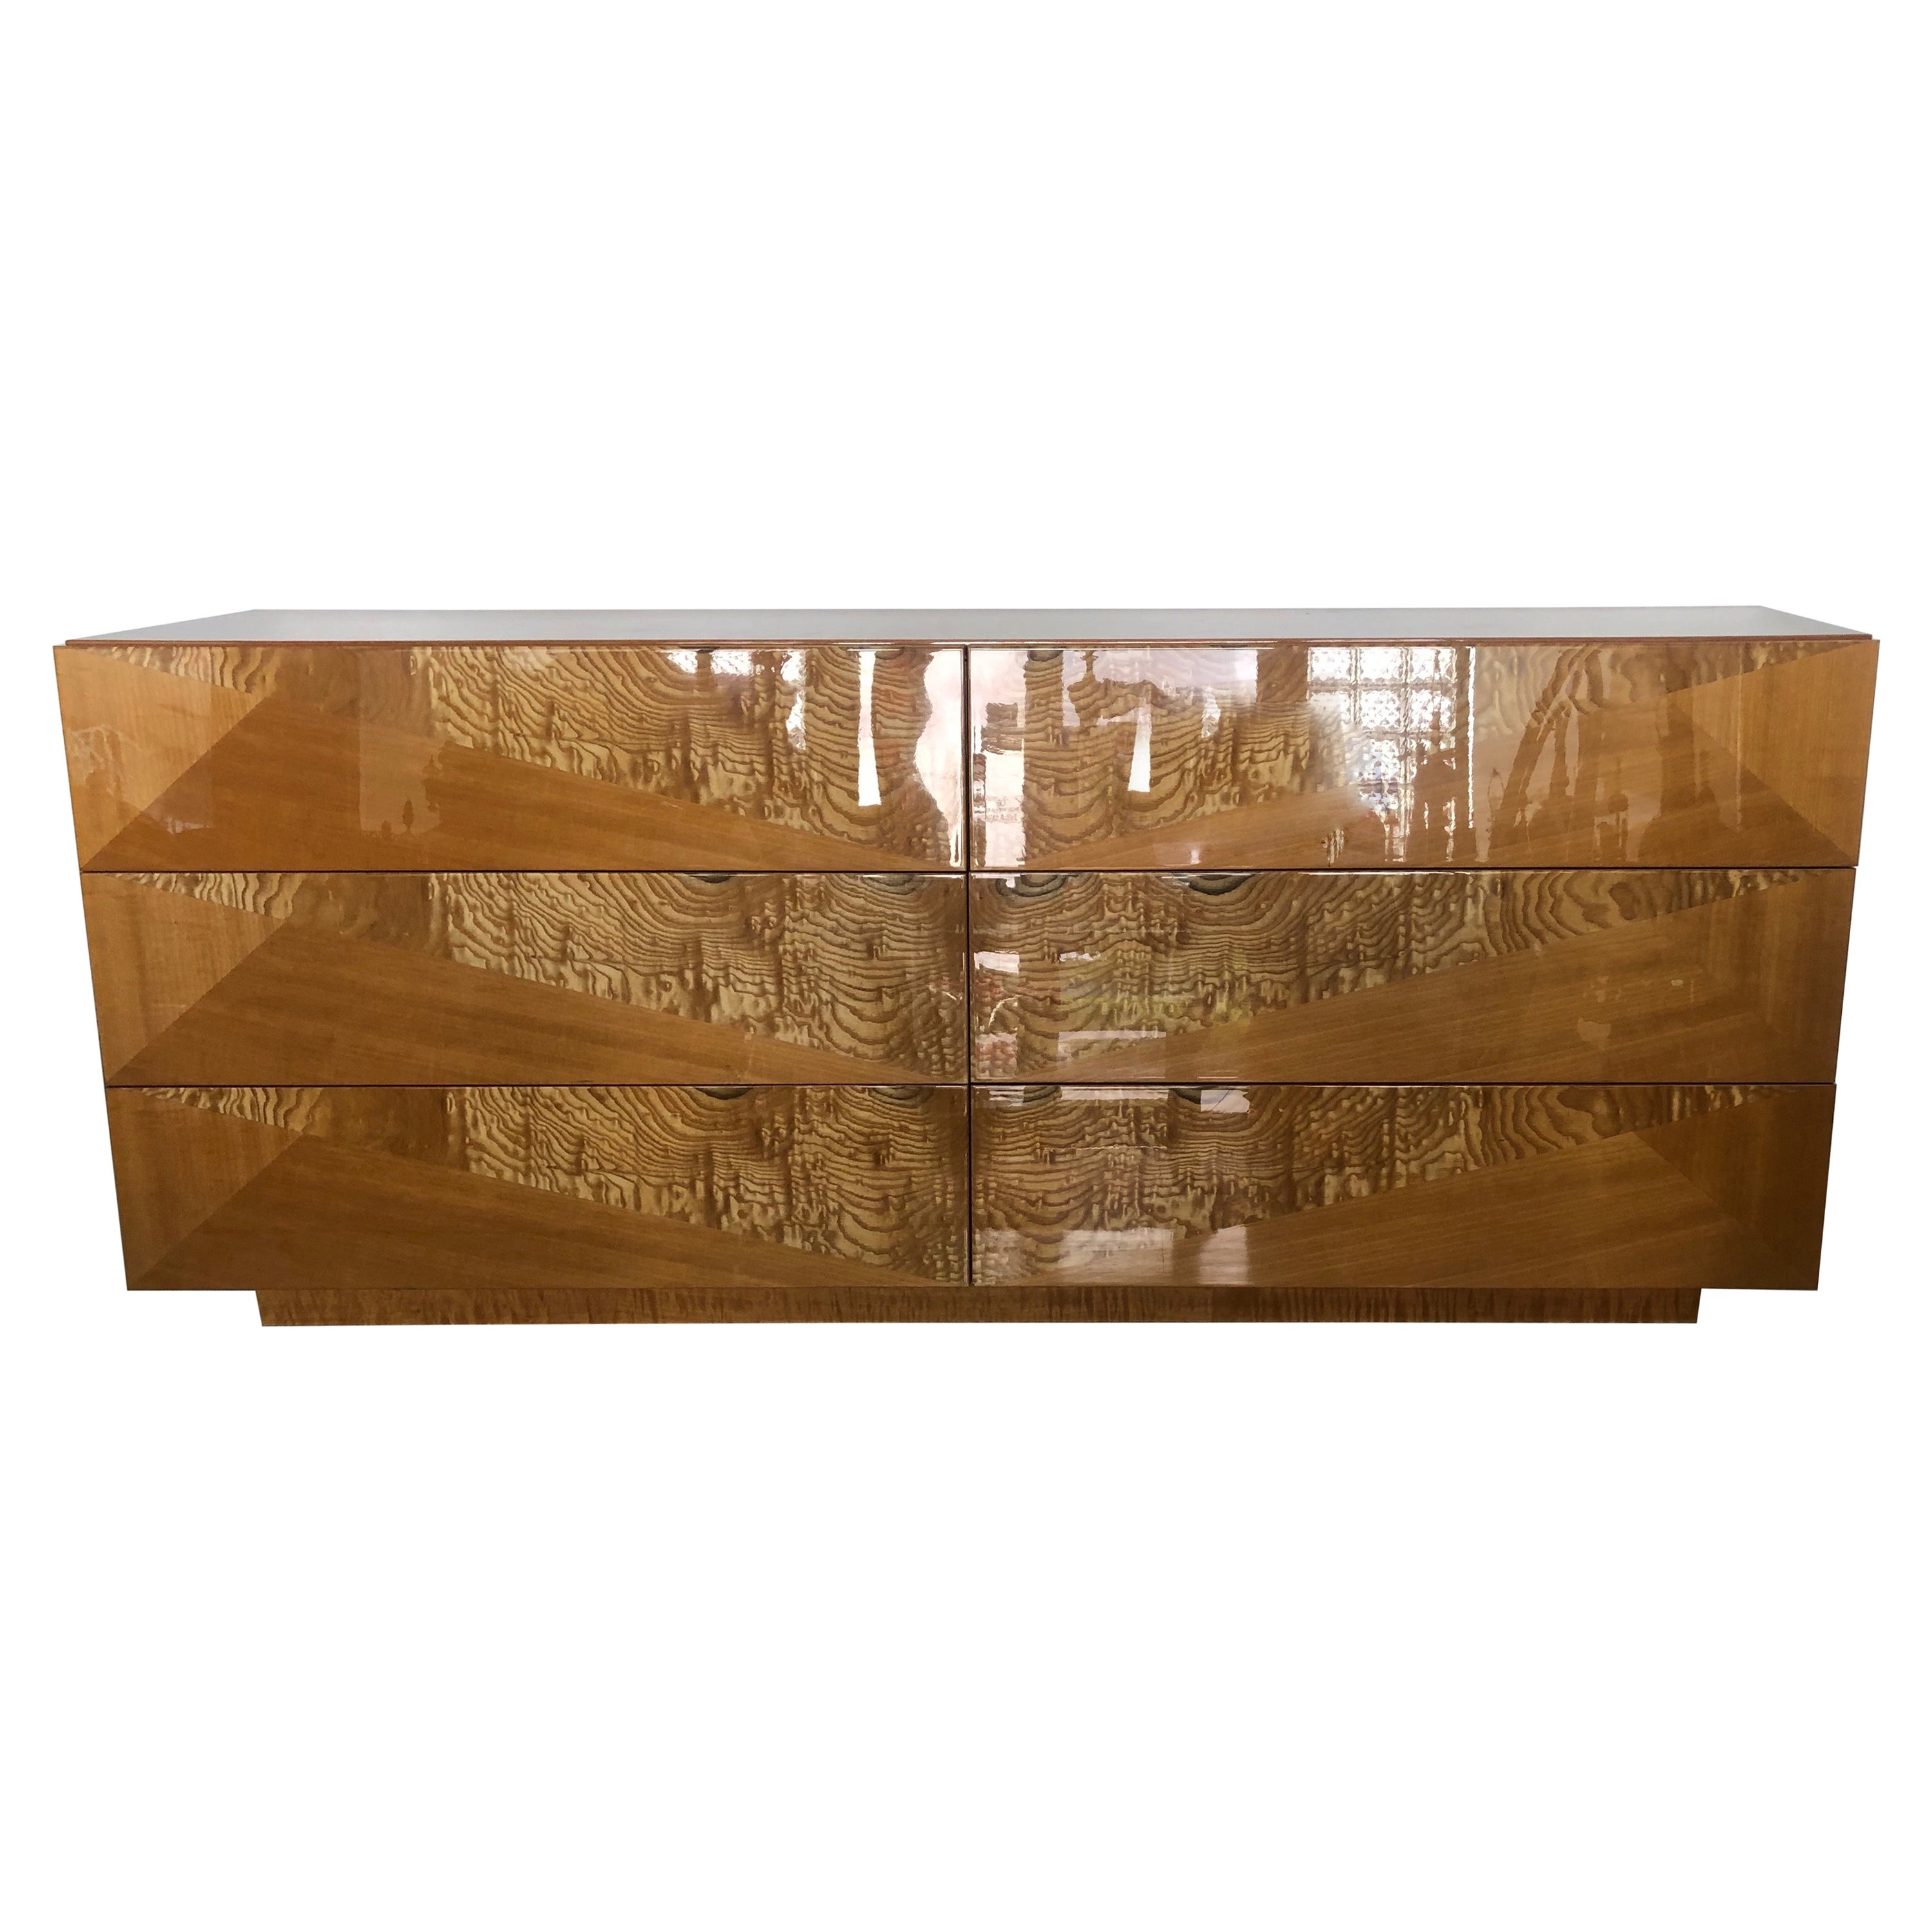 Giorgio Collection Exotic Wood Dresser in High Gloss Finish